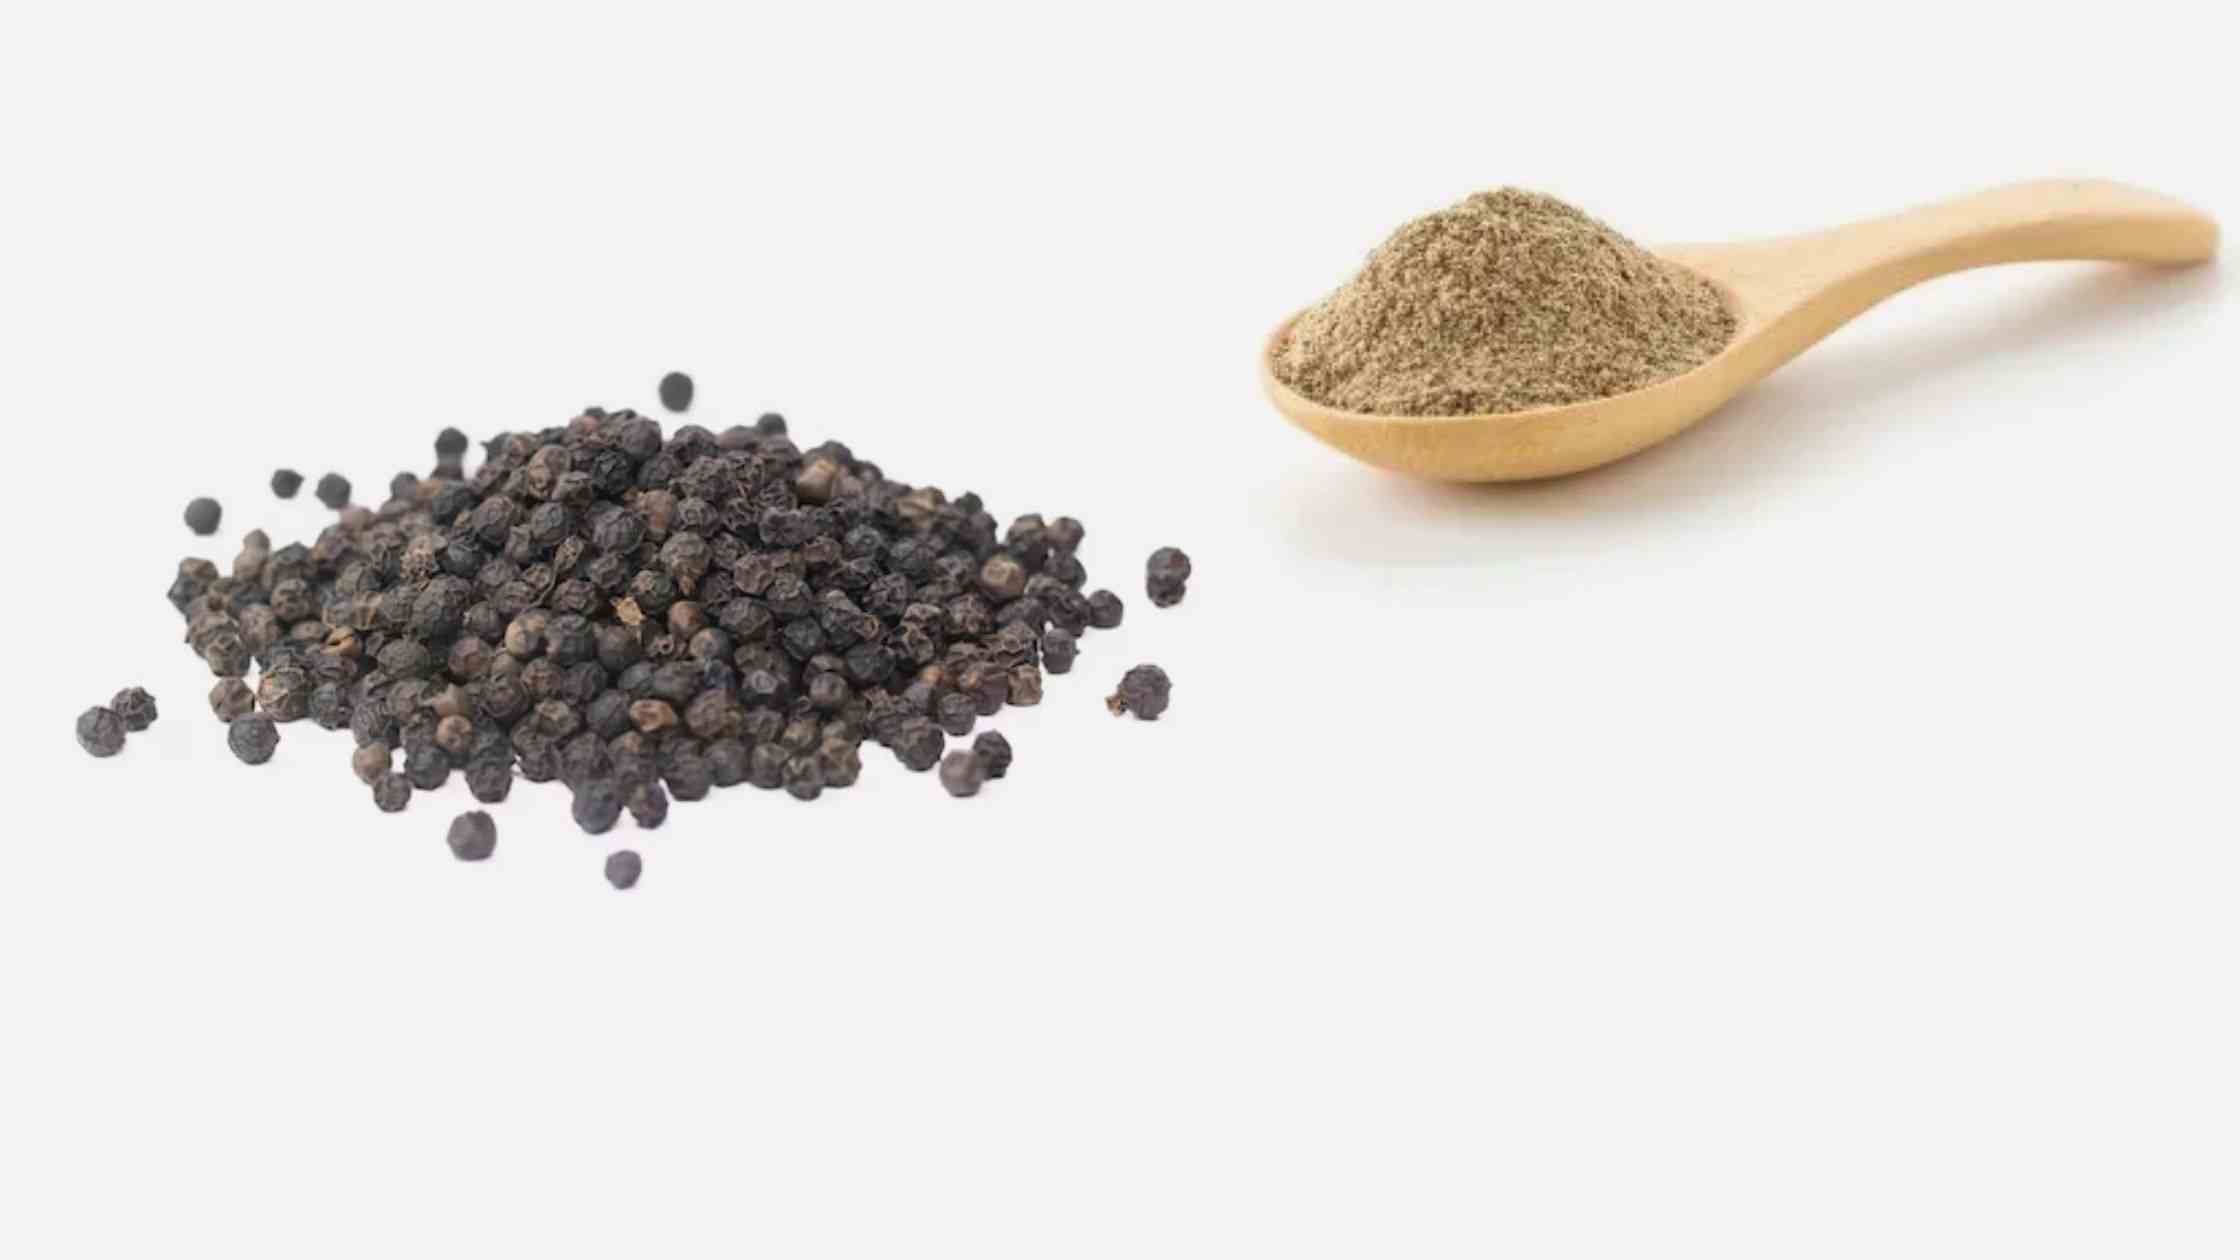 Spiritual Meaning of Smelling Black Pepper